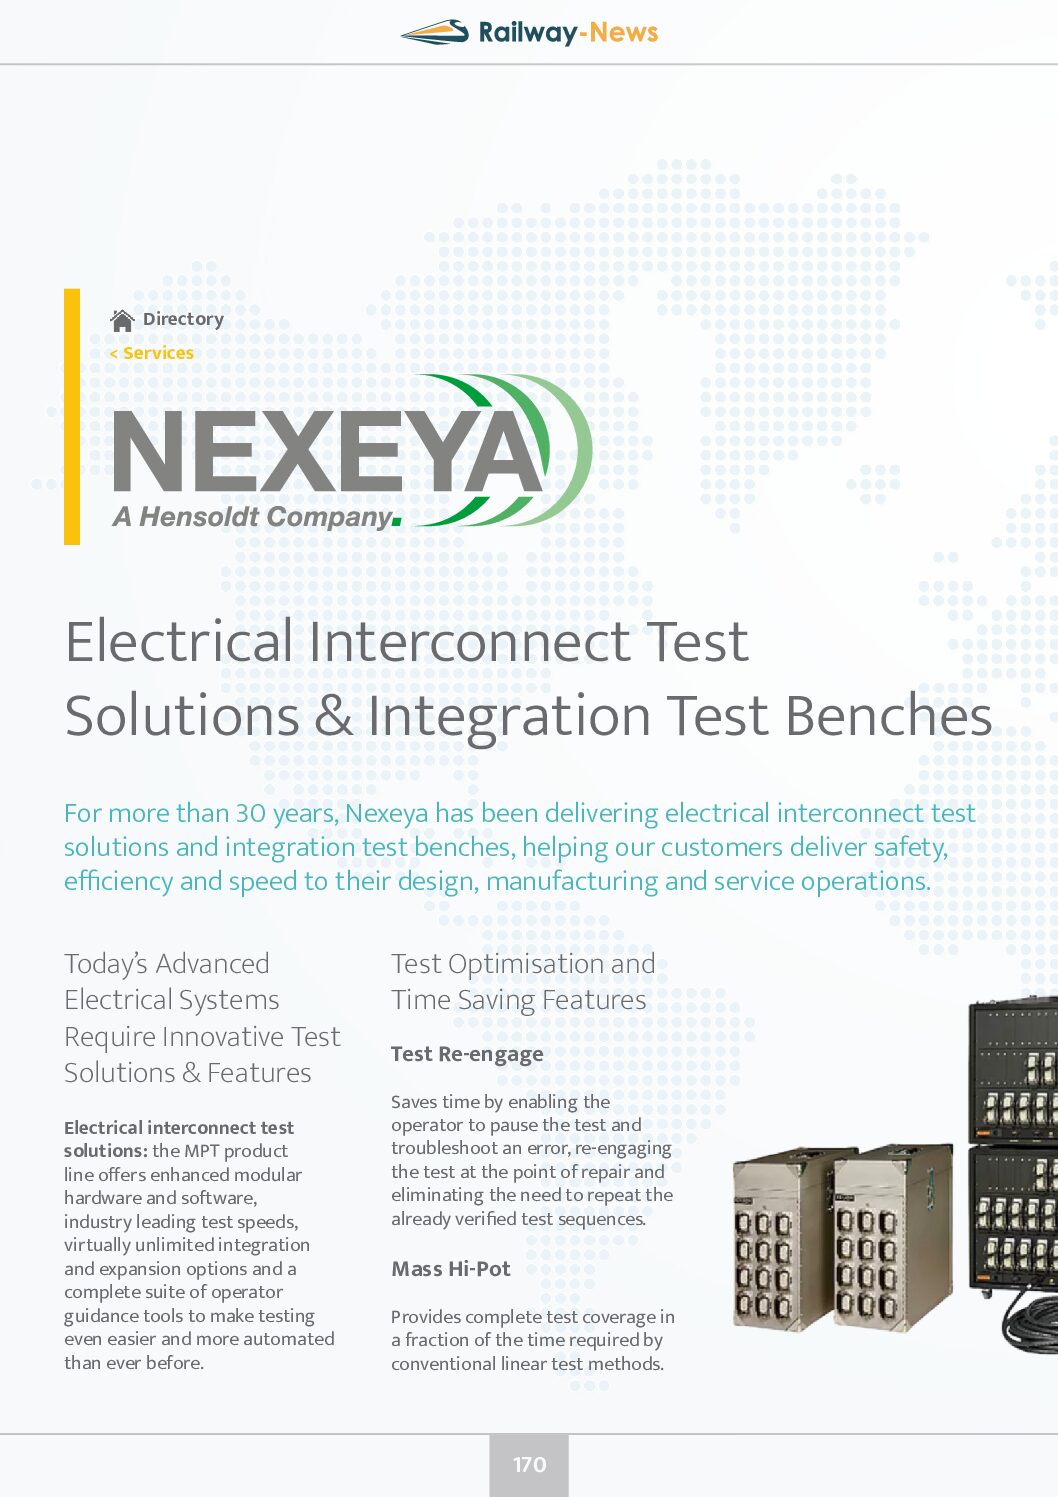 Nexeya – Electrical Interconnect Test Solutions & Integration Test Benches